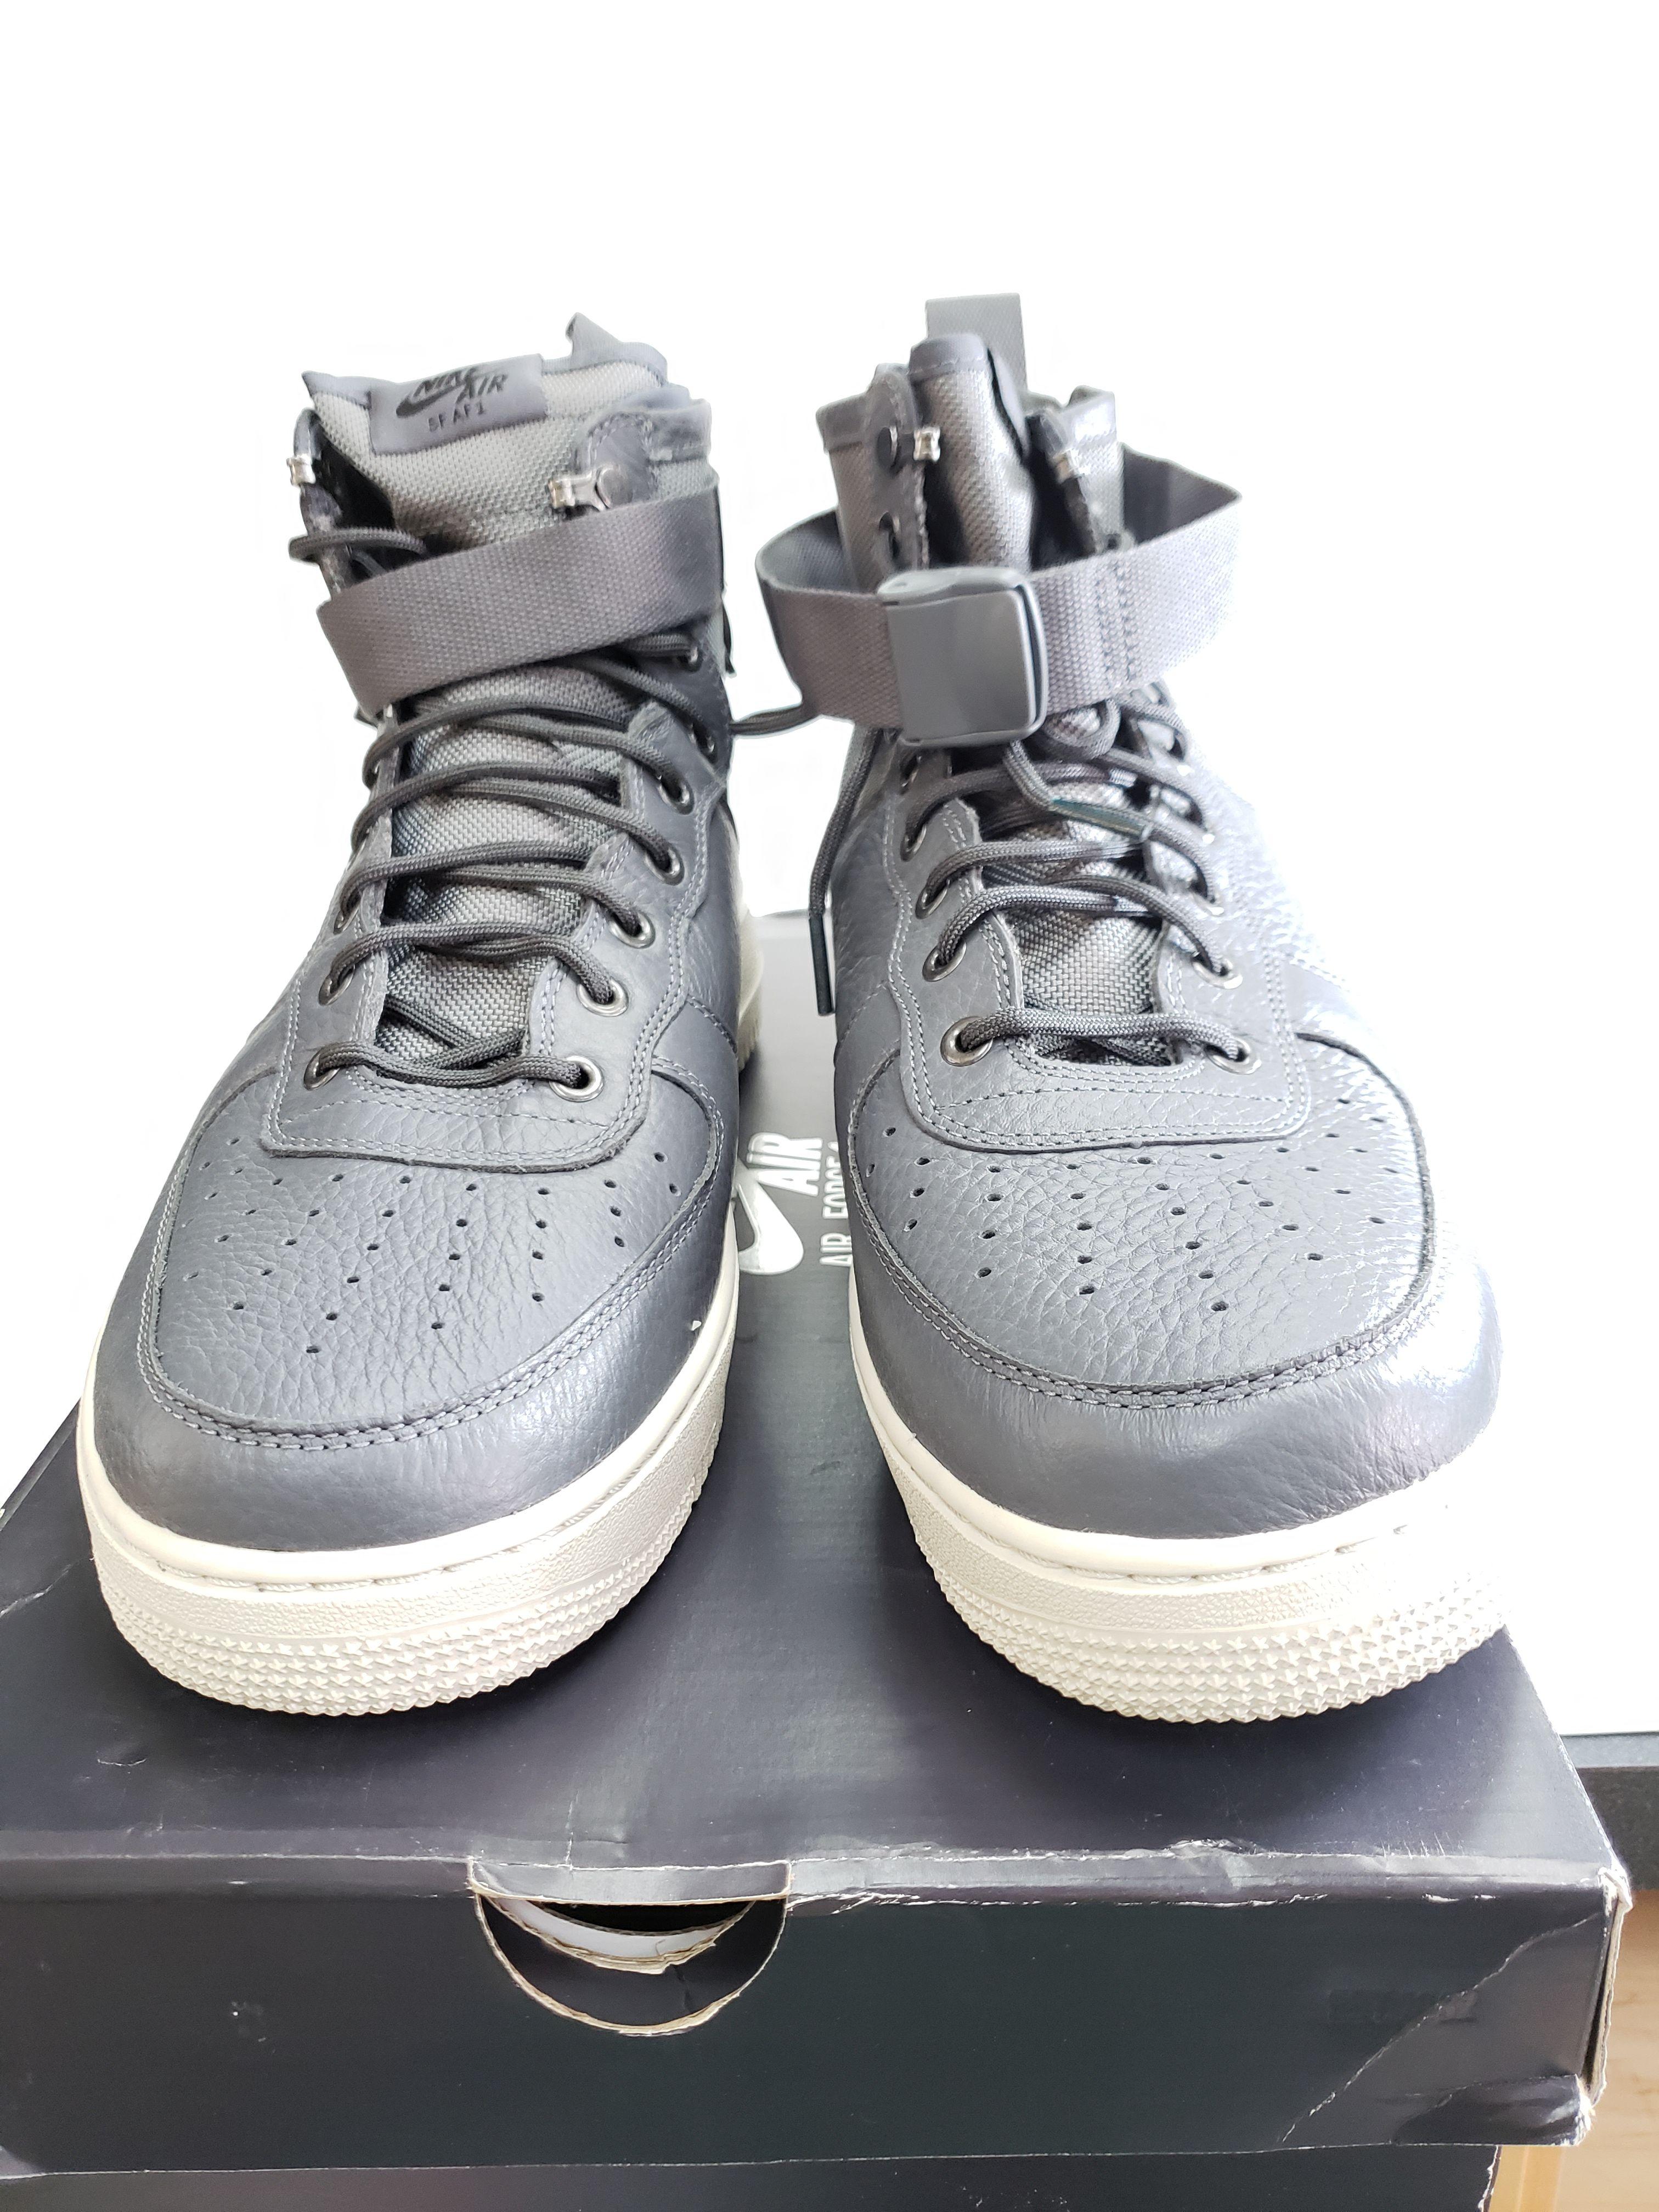 Mens Nike Air Force 1 SF AF1 Mid Ret. $160 Grey Shoes Size 13